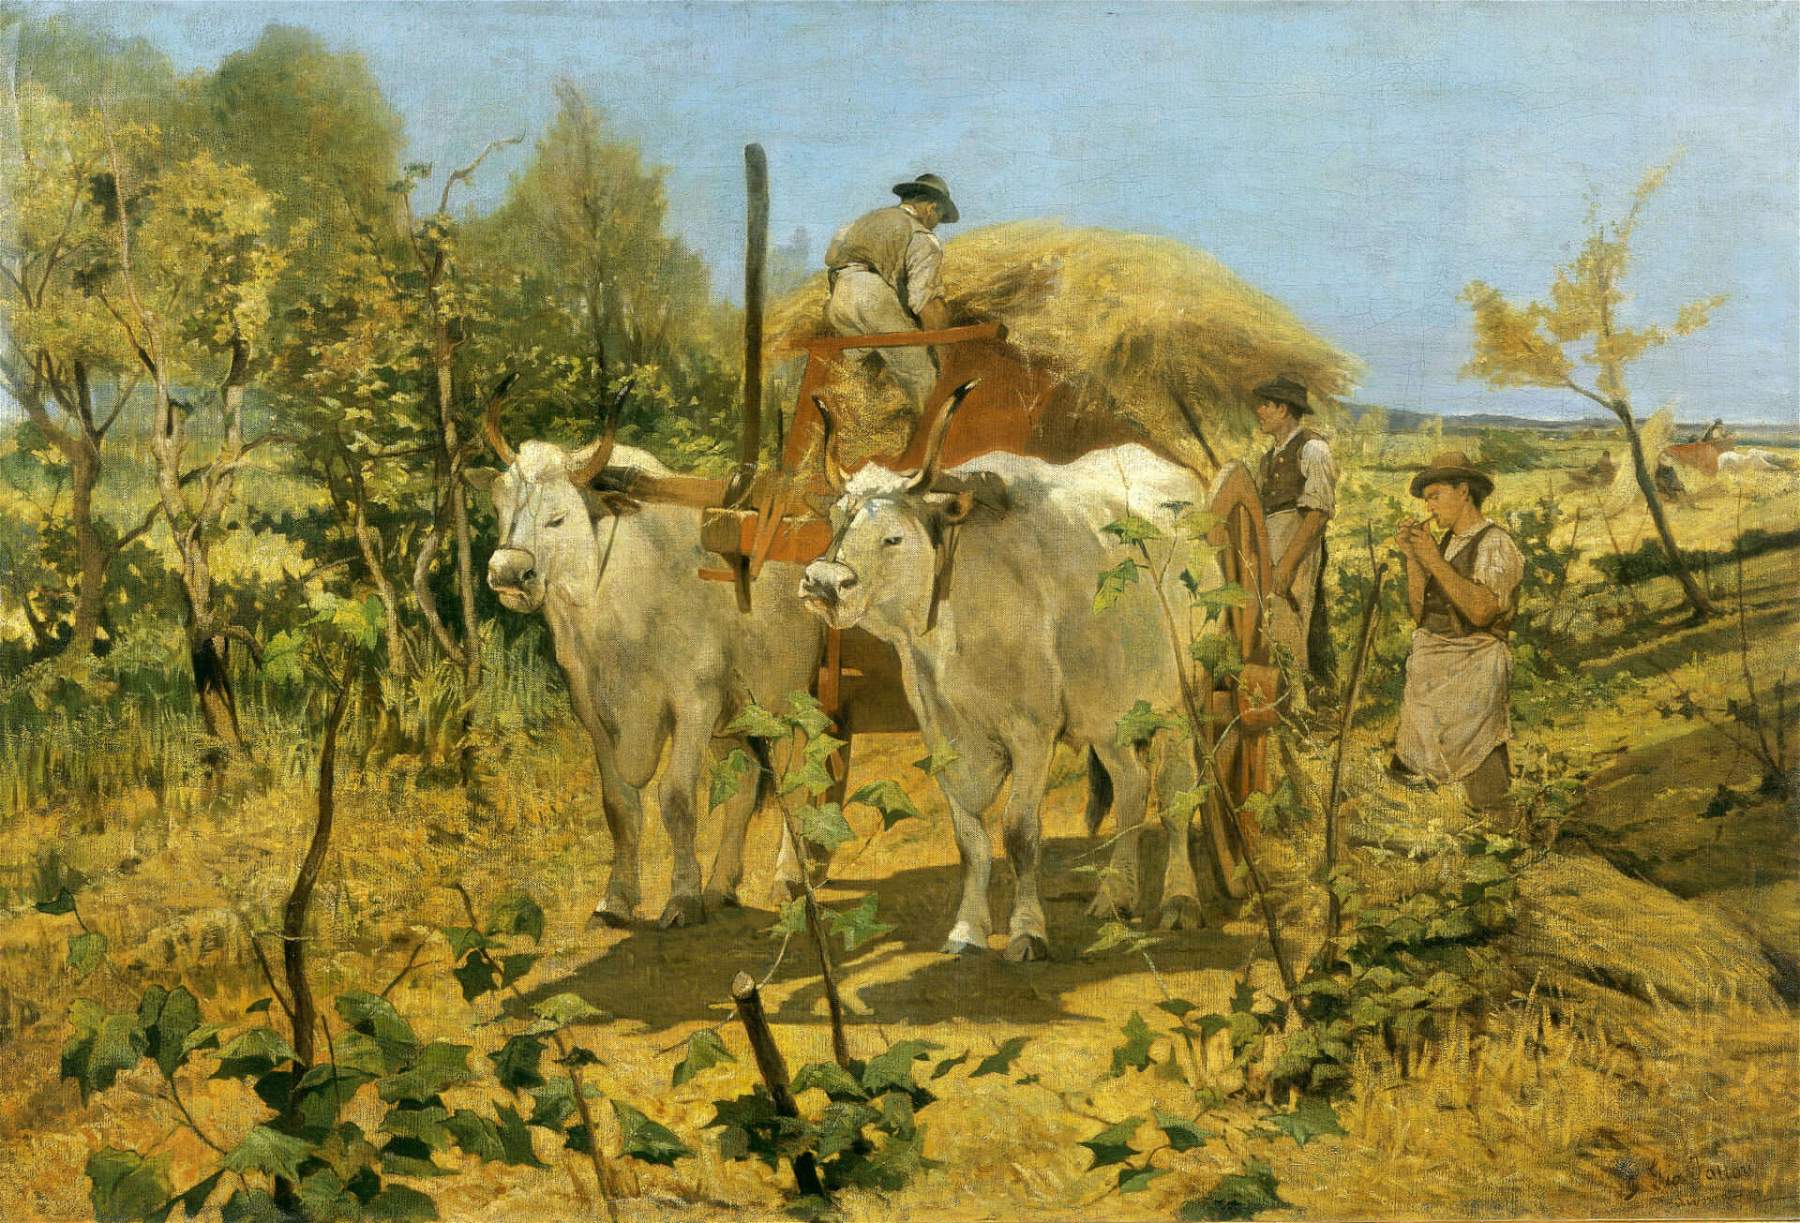 An exhibition in Brescia on the Macchiaioli with more than 100 works by Fattori, Signorini and colleagues